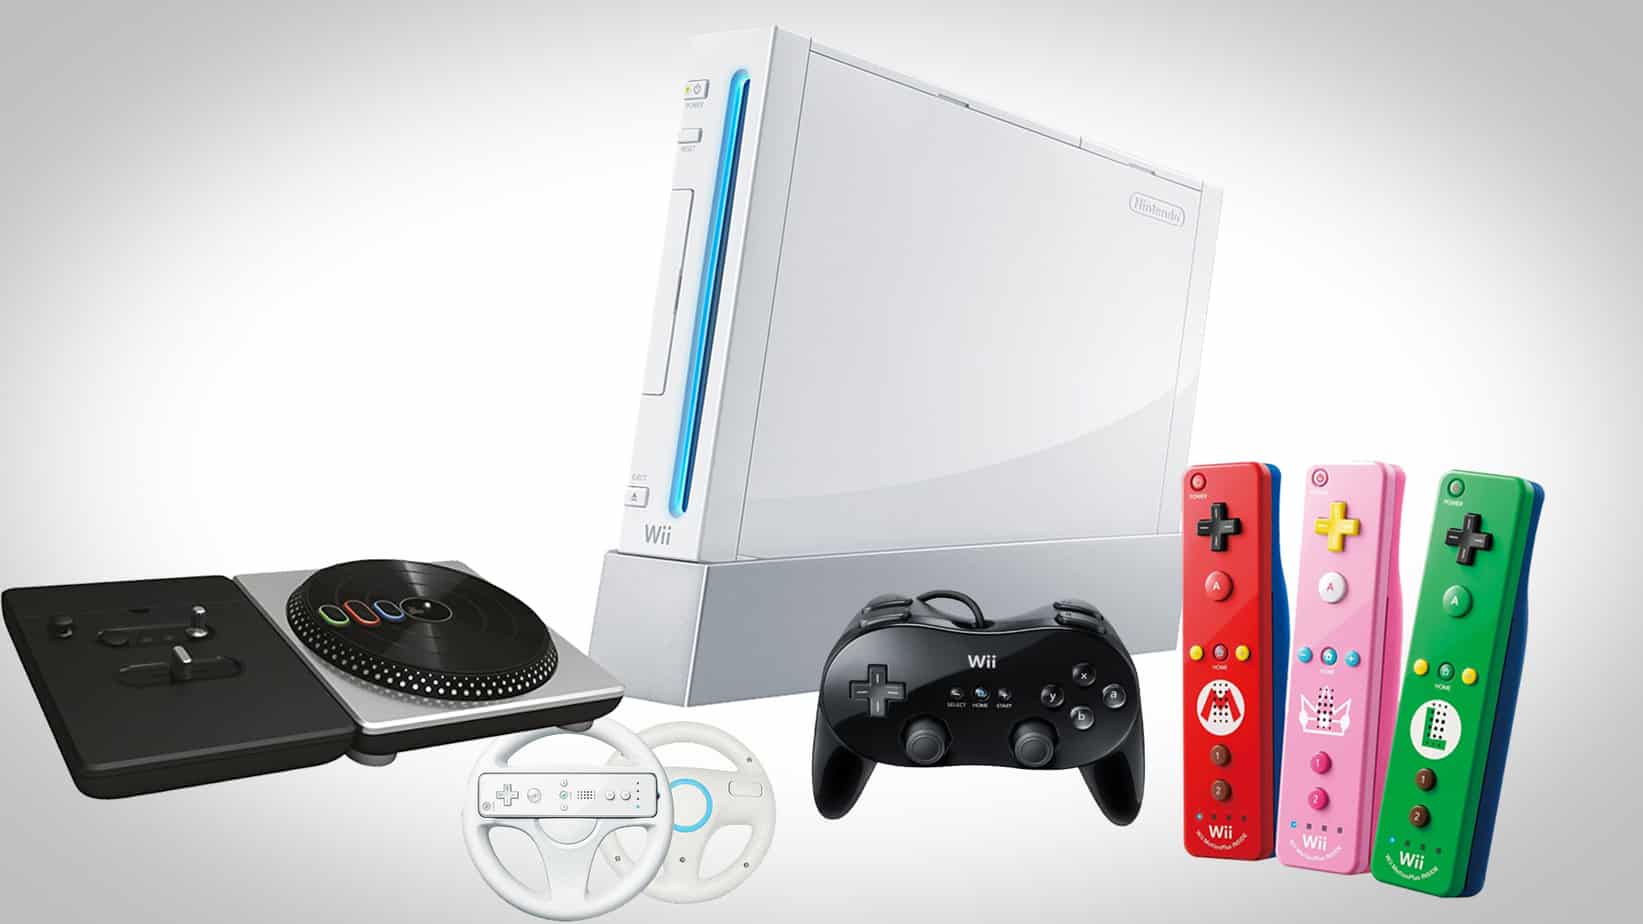 What Accessories Are Needed To Play Wii Games?